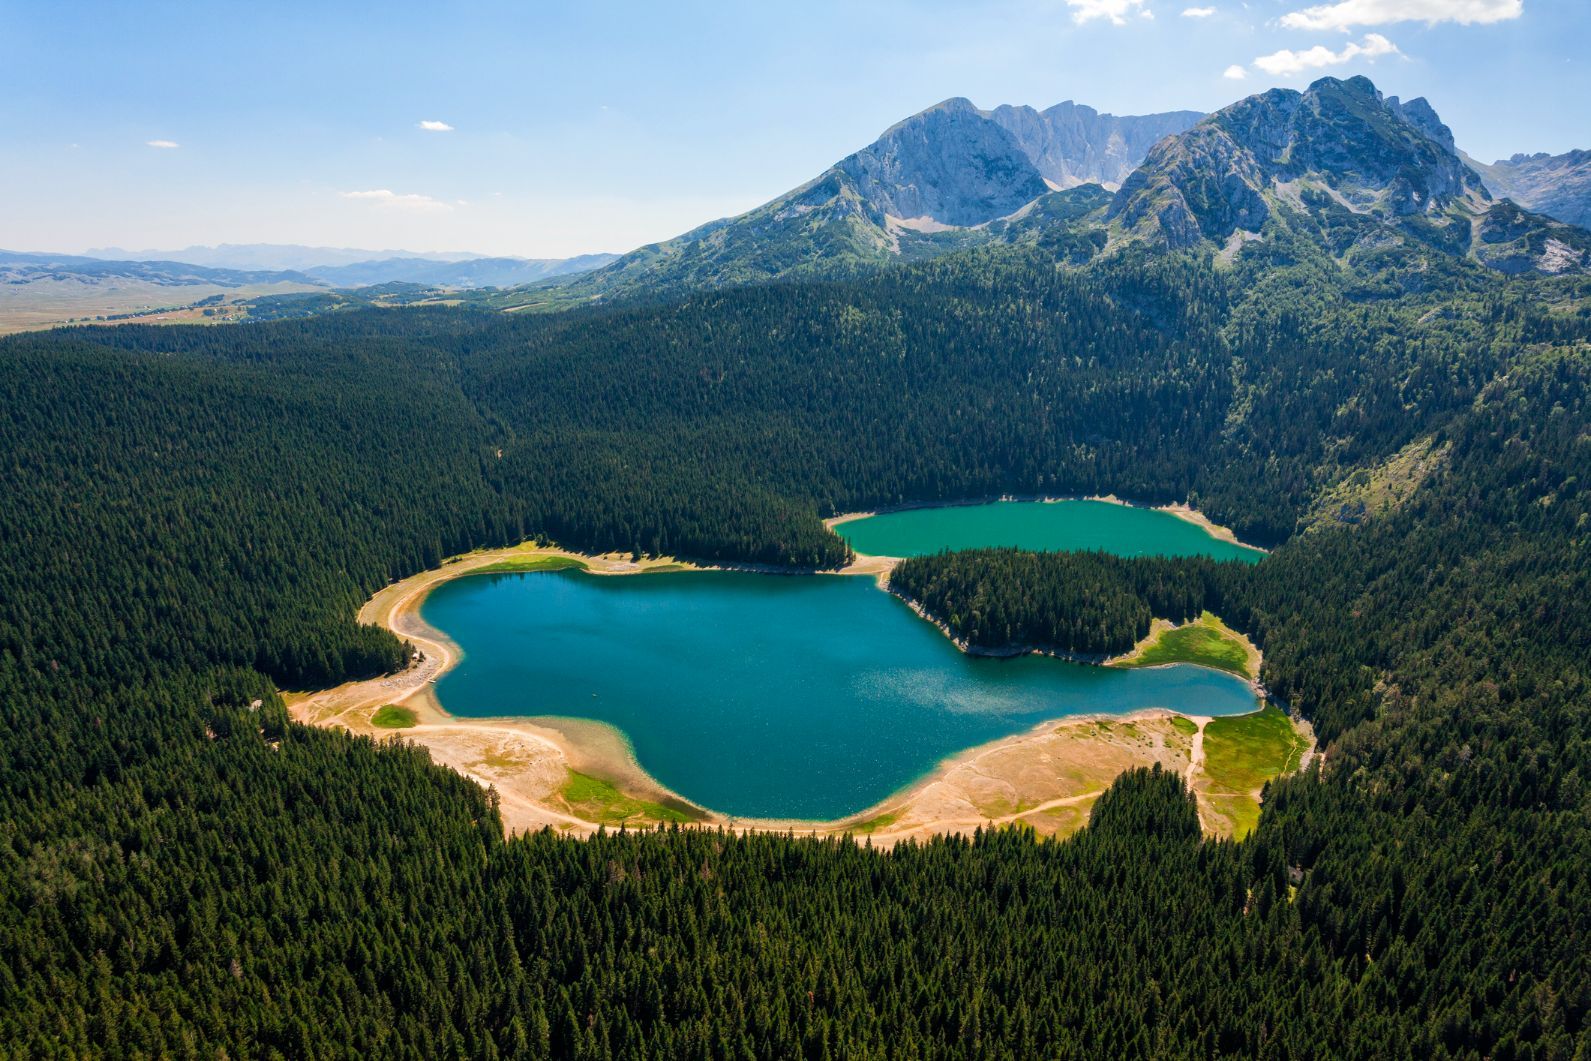 Black Lake in the Durmitor National Park is surely one of the most scenic spots in all of Europe. Photo: Getty